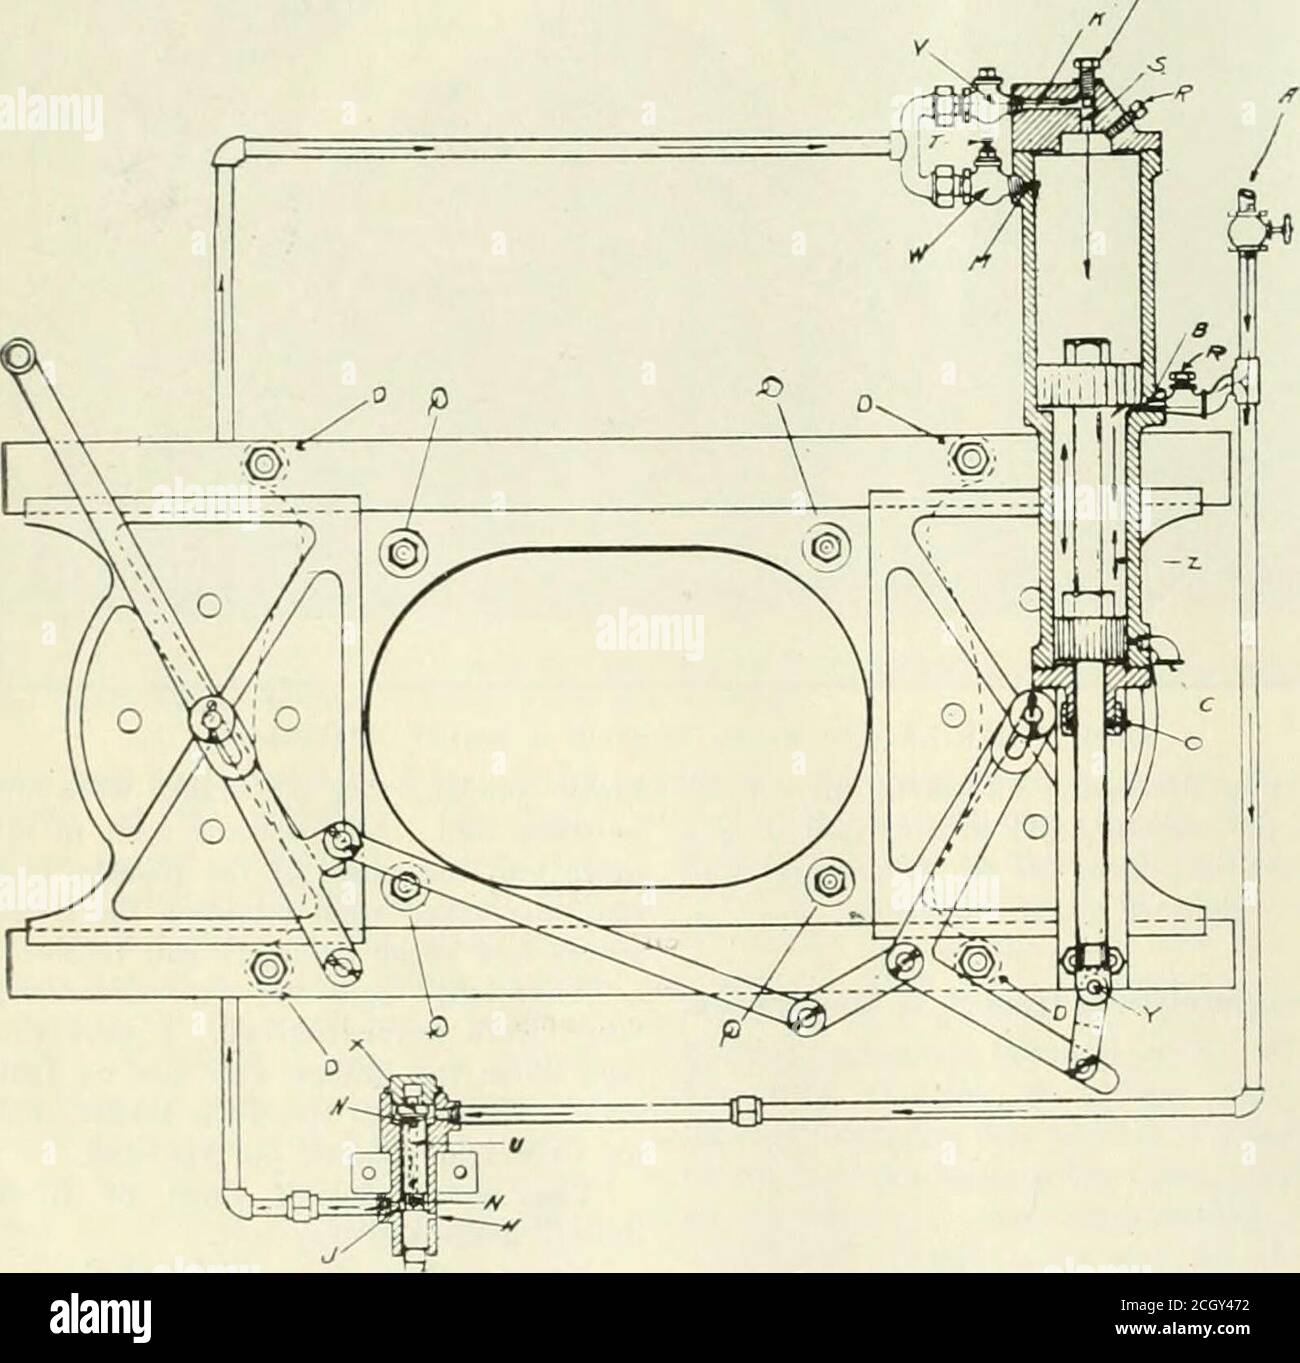 . Railway and locomotive engineering : a practical journal of railway motive power and rolling stock . he four project- the foot valve as shown. By casting thedoor-ring in blank, holes can be drilledto suit old studs, making it an easy mat-ter to apply this device to a locomotiveformerly equipped with old-style swing-ing door. The opening of valve A from mainair reservoir blocks the air within cham-ber Z and also within G of foot valve,the pressure against larger area of up-per piston head, thus holding the doorsshut. Foot pressure on pedal P lifts foot-valve stem off its seat, closes port H a Stock Photo